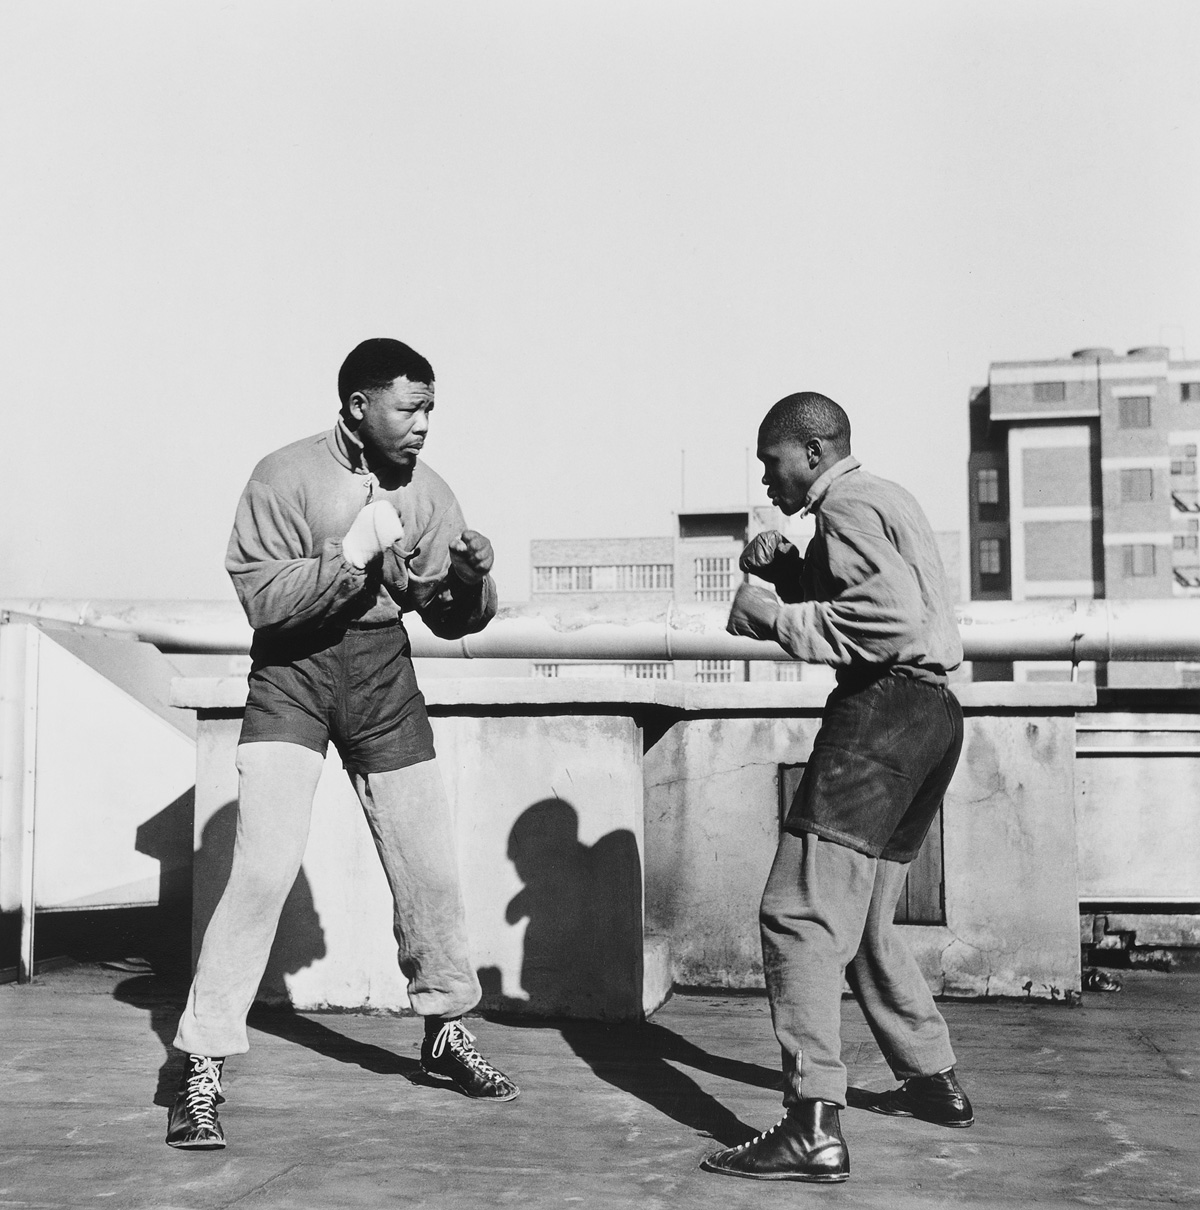 Bob Gosani, Treason Trial. End of Round One Mandela boxing on the roof top of a building in Johannesburg, 1957, 2010, © l’artista